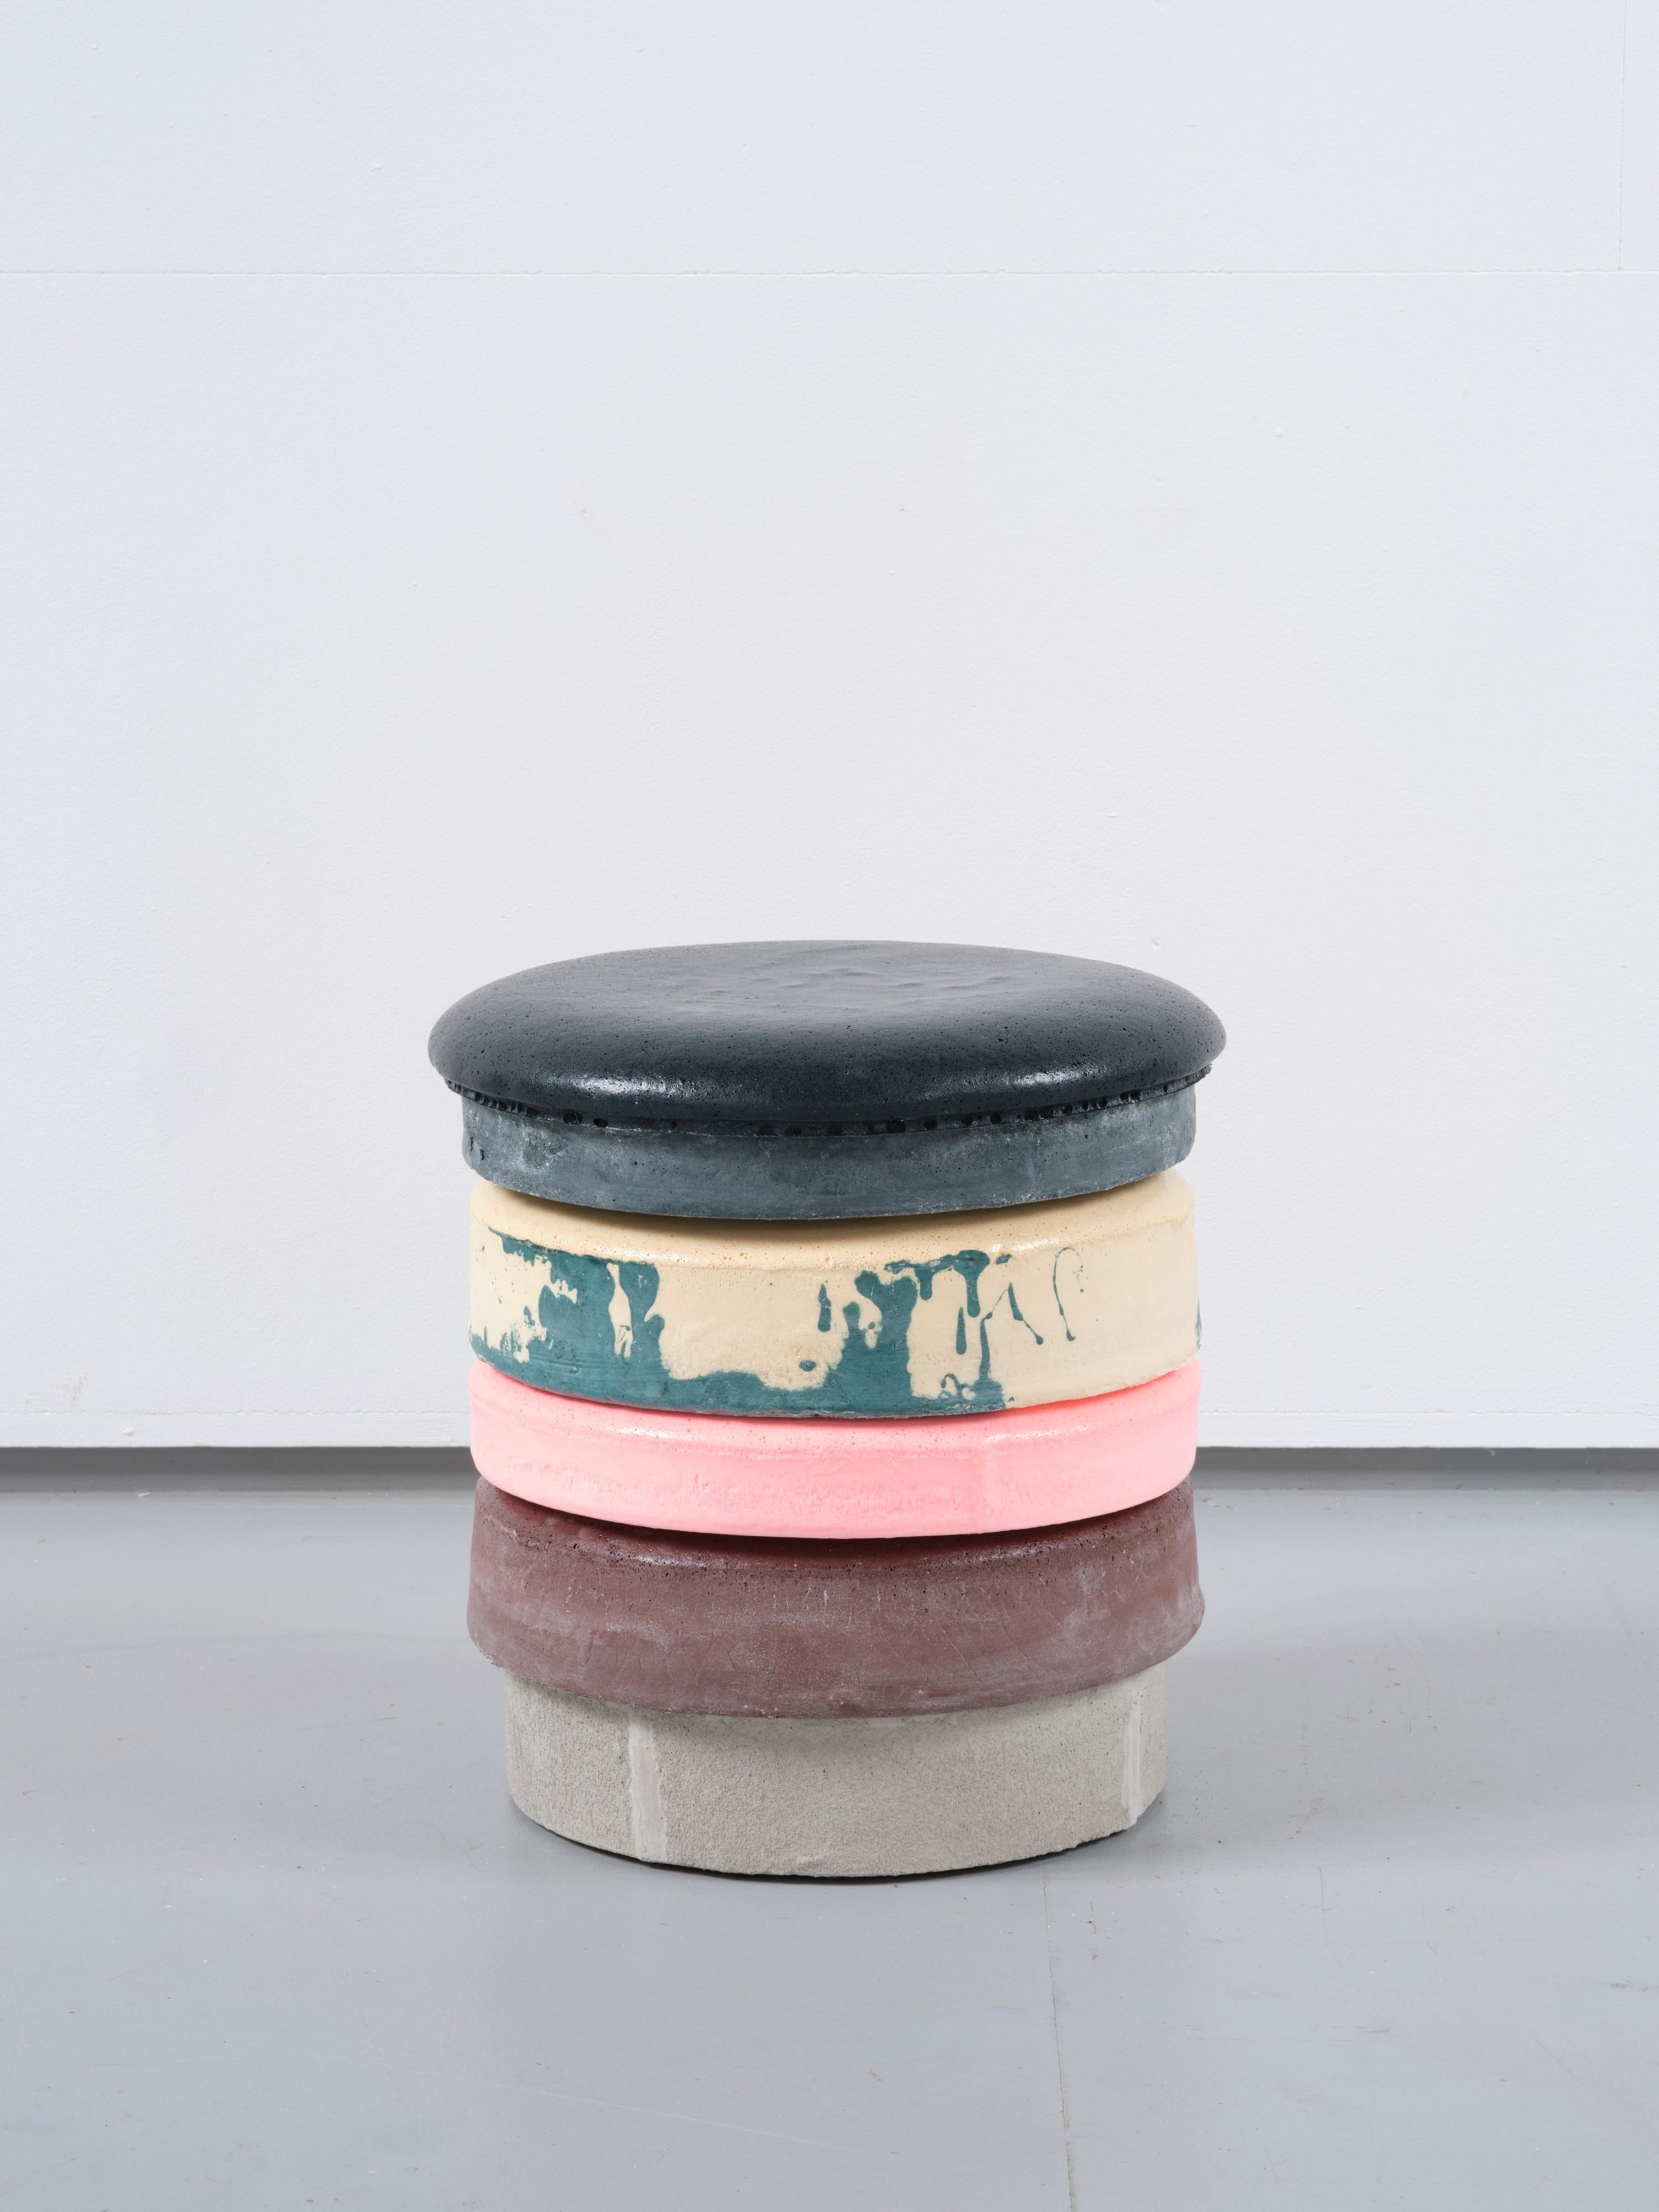 Cristian Andersen
Macaron stool, 2020
Each unique, signed by the artist
Polyurethane, pigments, concrete and cork
Measures: H 39 cm (15 3/8 in) ø 37 cm

Cristian Andersen (*1974) has been working at the interface between design and sculpture